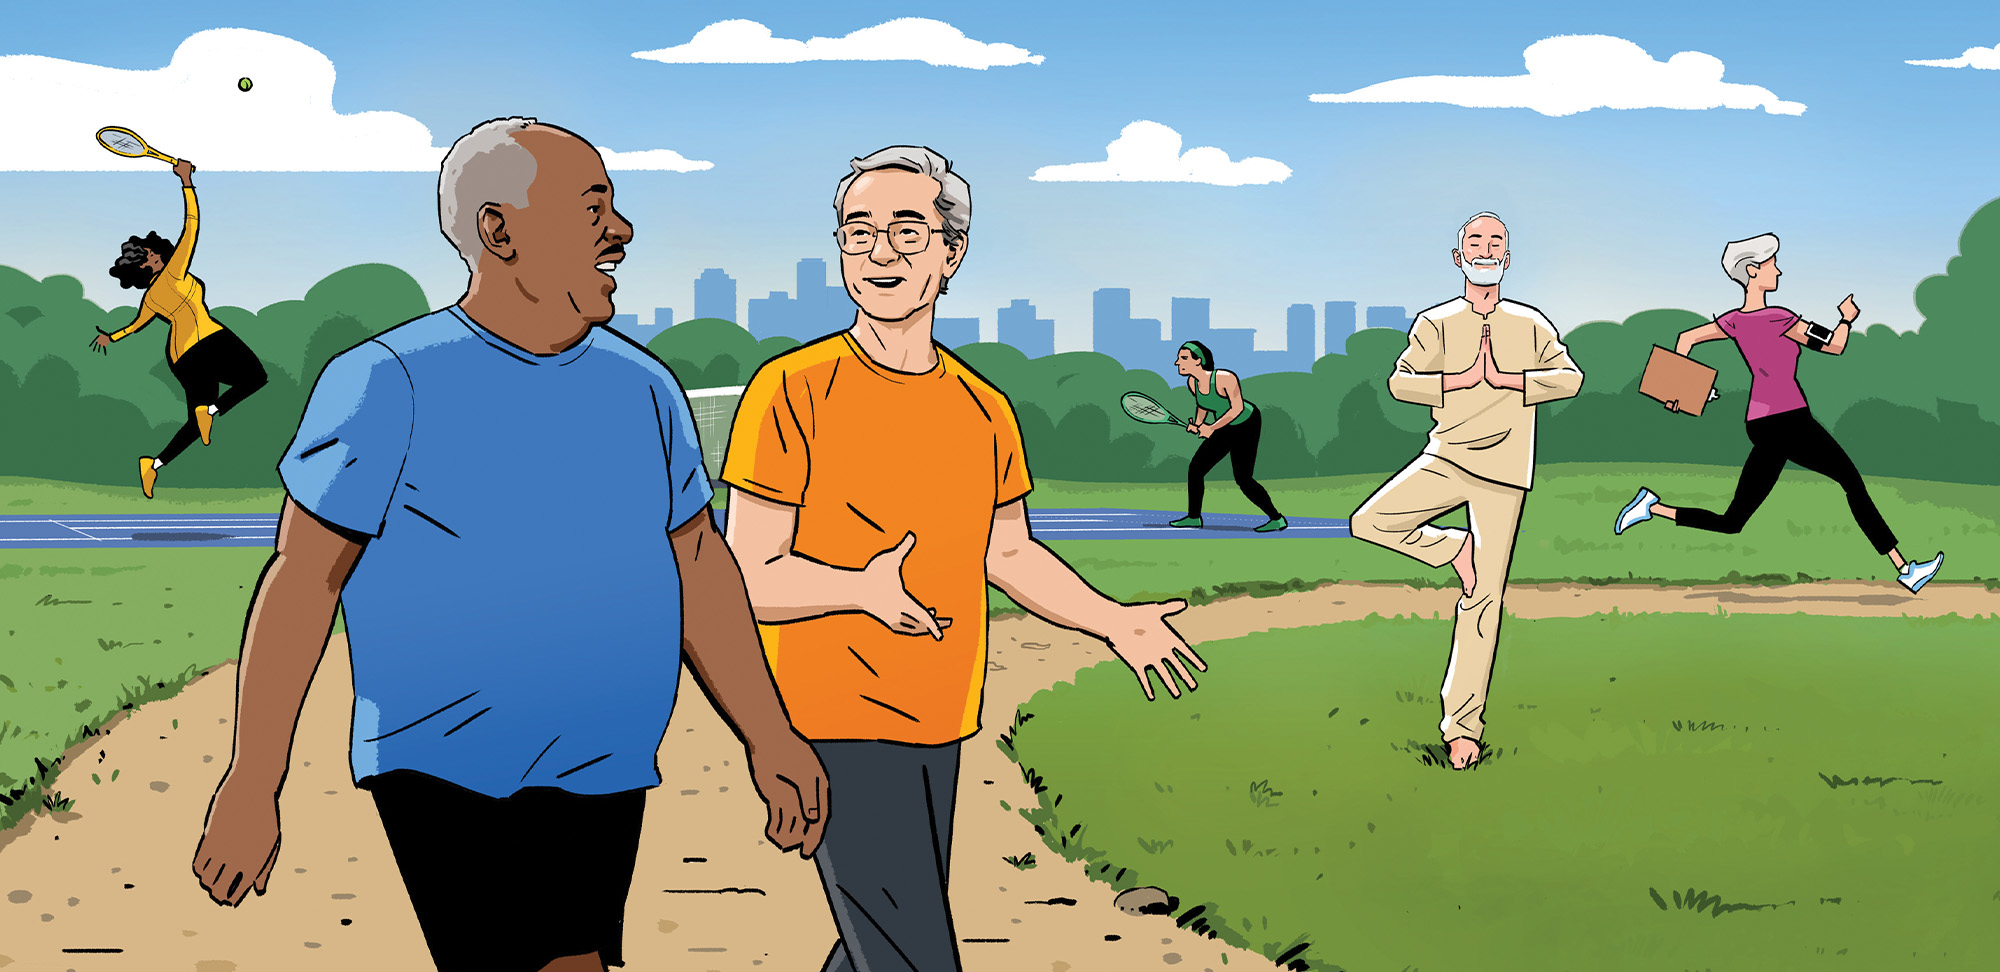 Illustration of park scene with variety of people doing different fitness activities